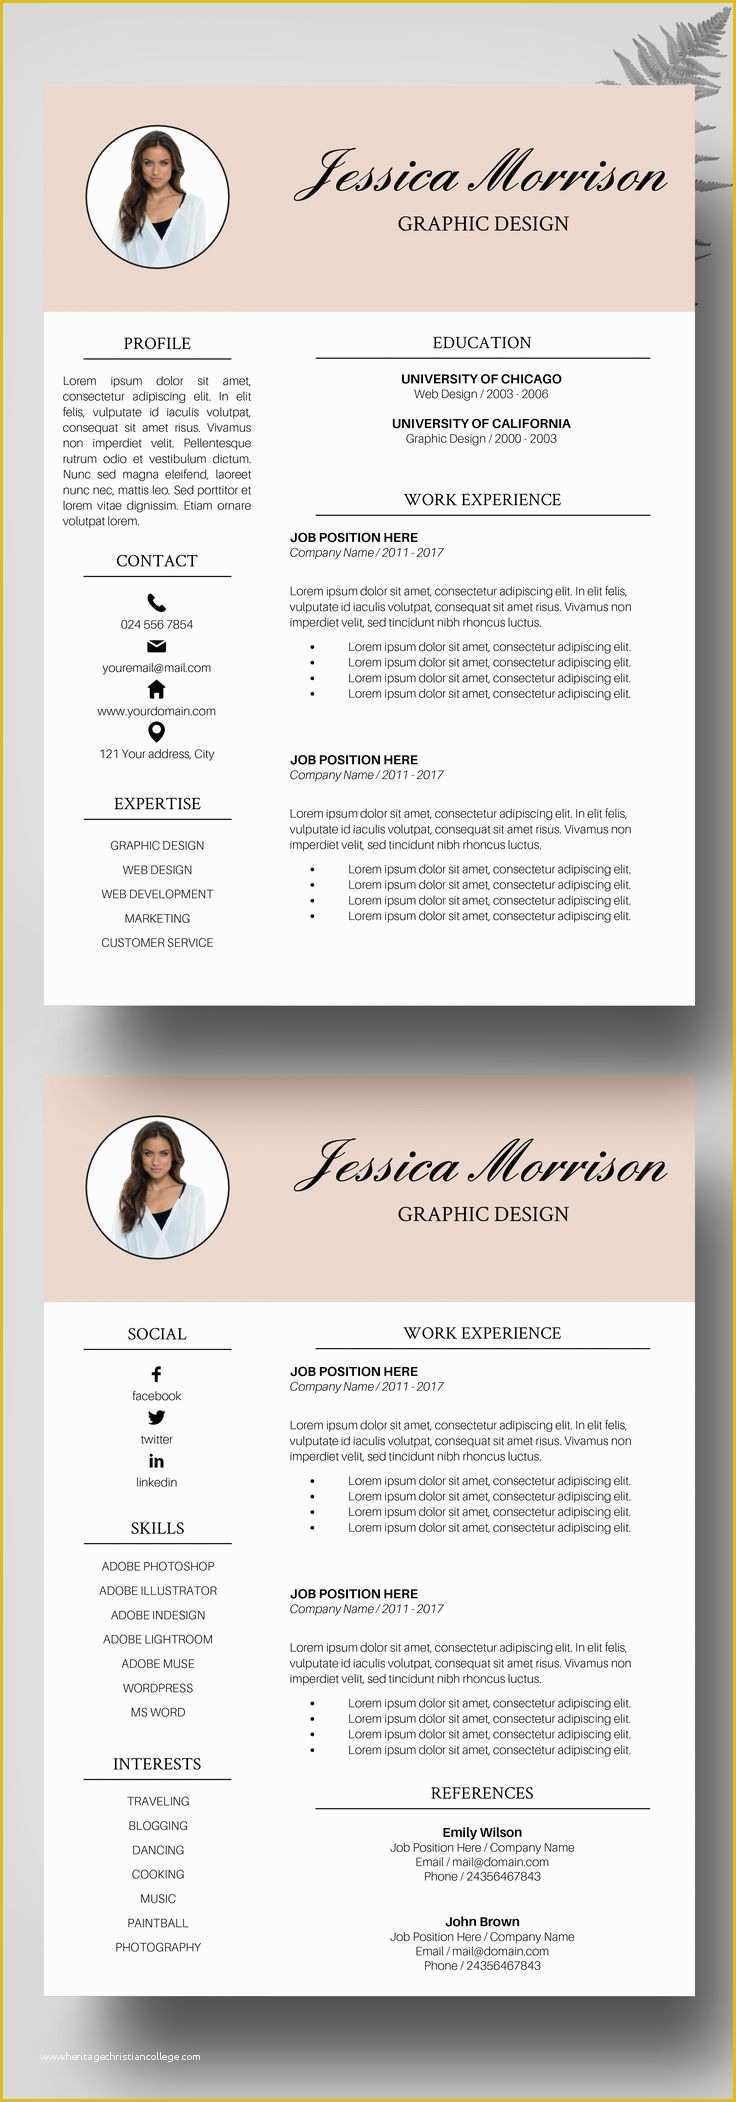 Free Cv Template Of 25 Unique Templates Free Ideas On Pinterest